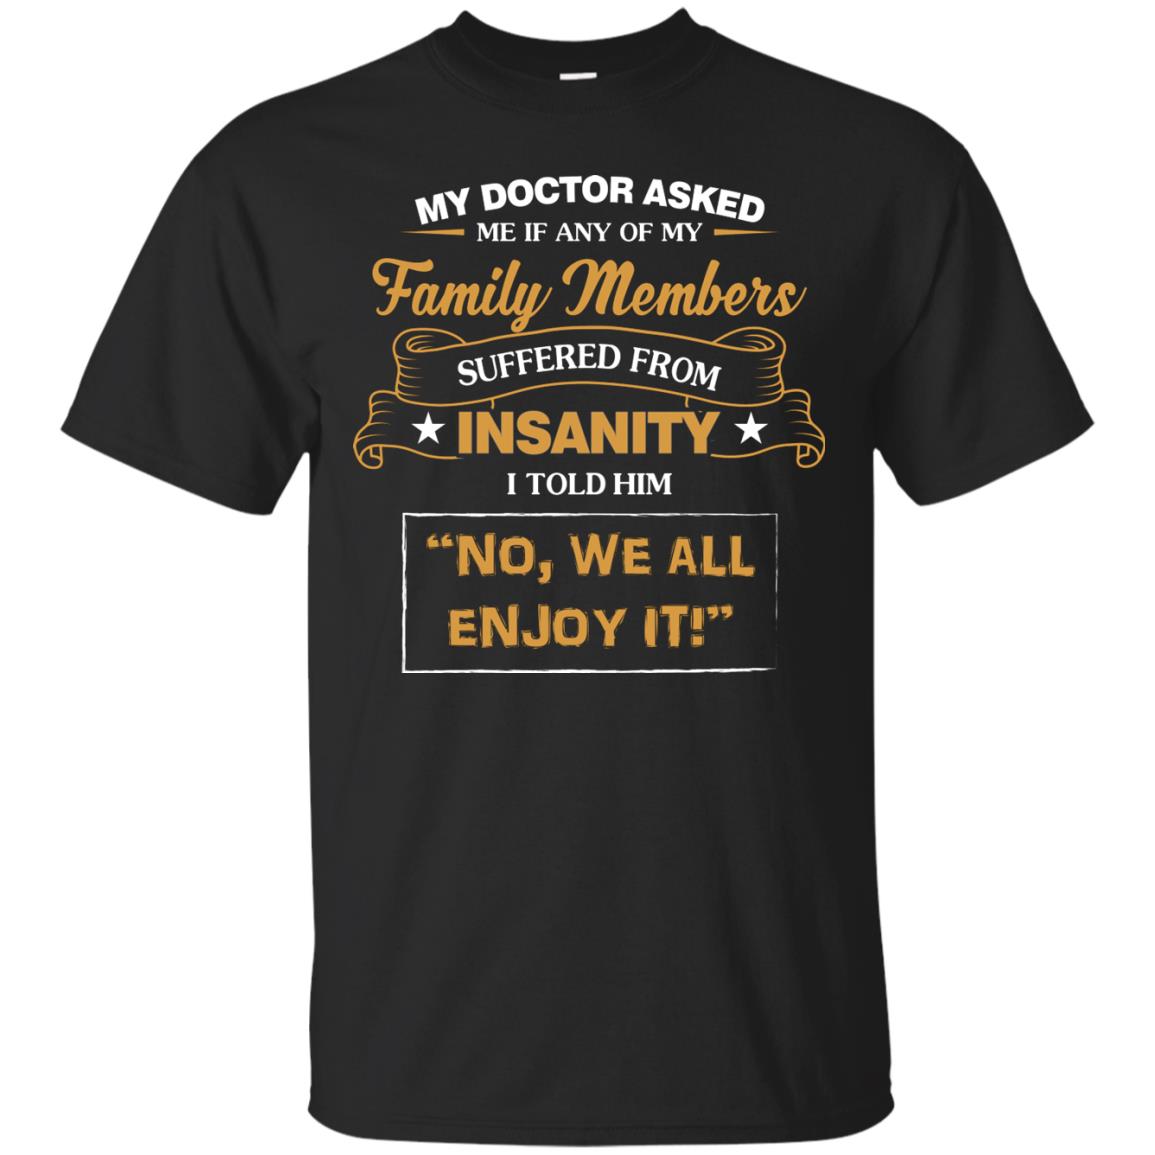 My Doctor Asked Me If Any Of My Family Members Suffered From InsanityG200 Gildan Ultra Cotton T-Shirt